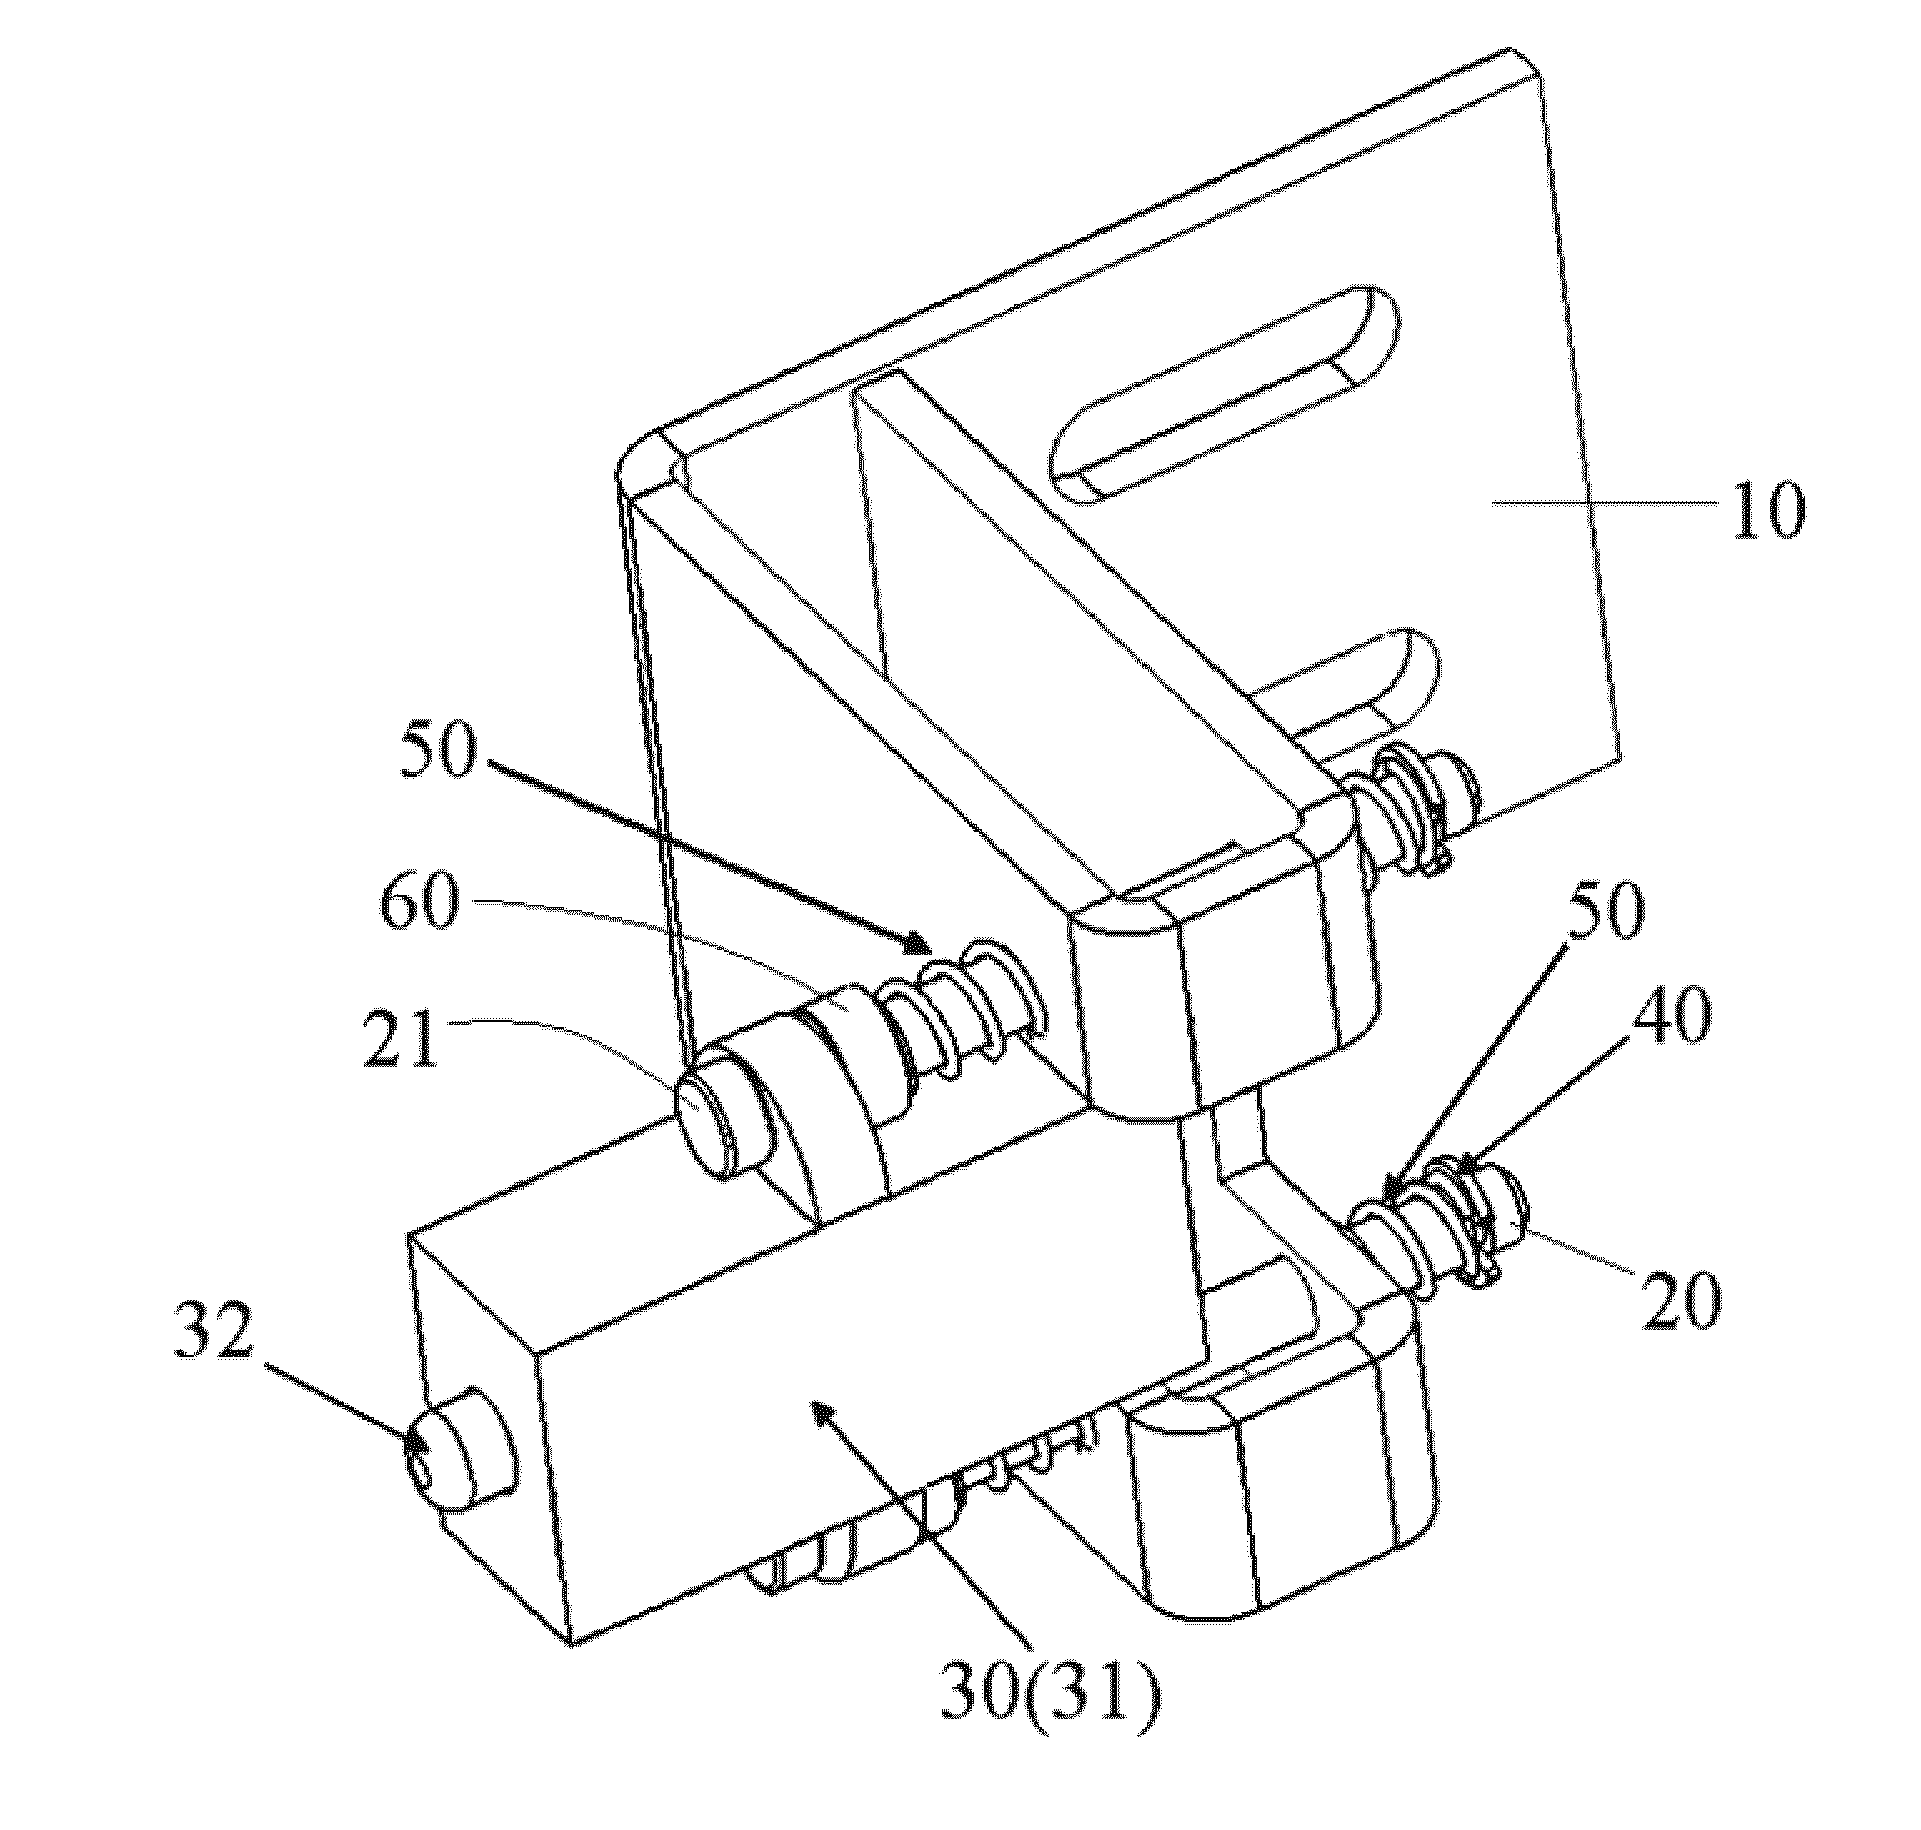 Device and method for mounting a sensor and for sealing a cabinet